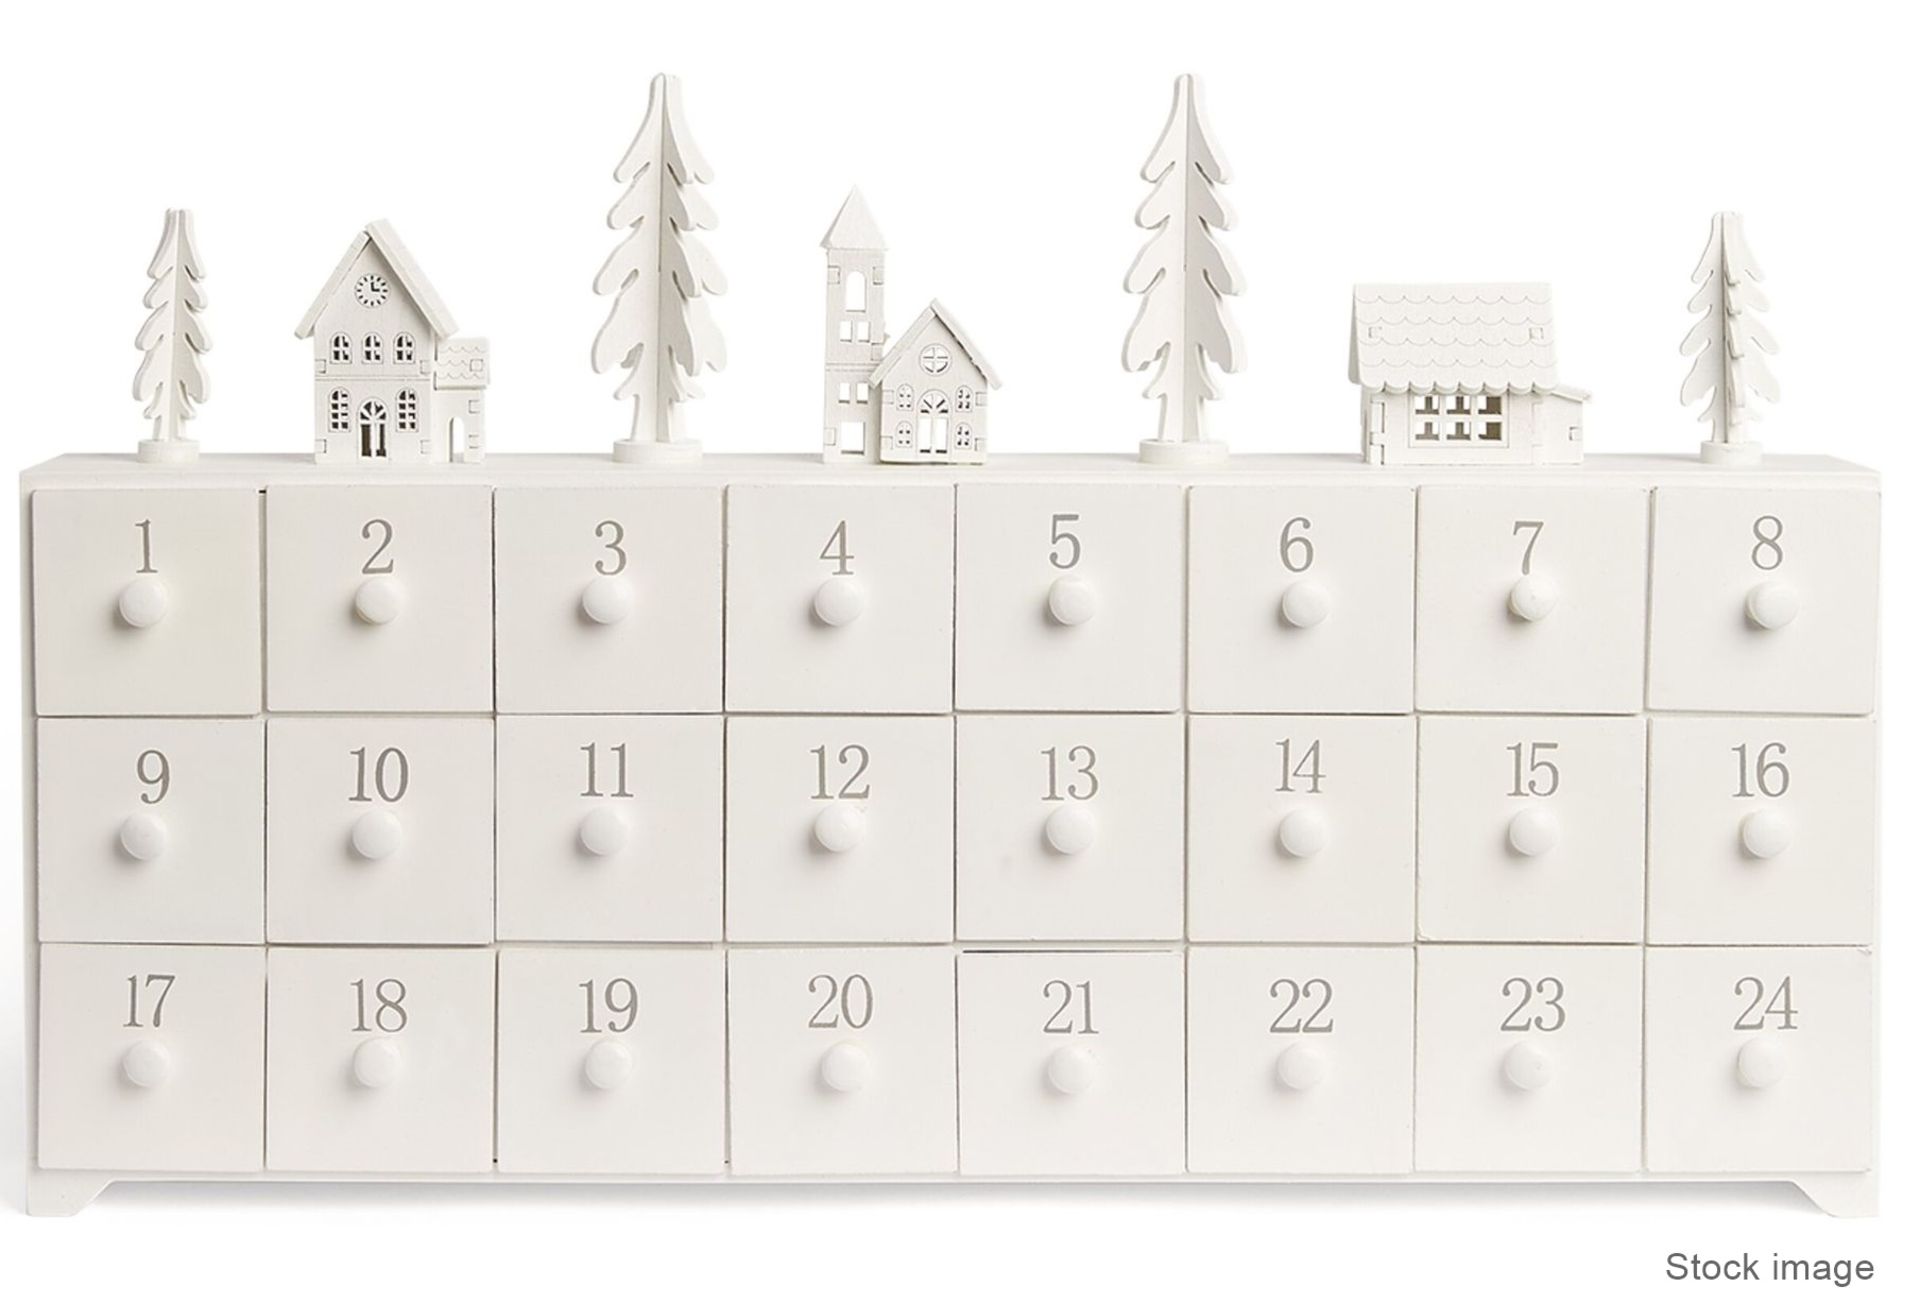 1 x HARRODS OF LONDON Wooden White Street Advent Calendar With Drawers - Ref: 6825630/HAS2164/WH2-